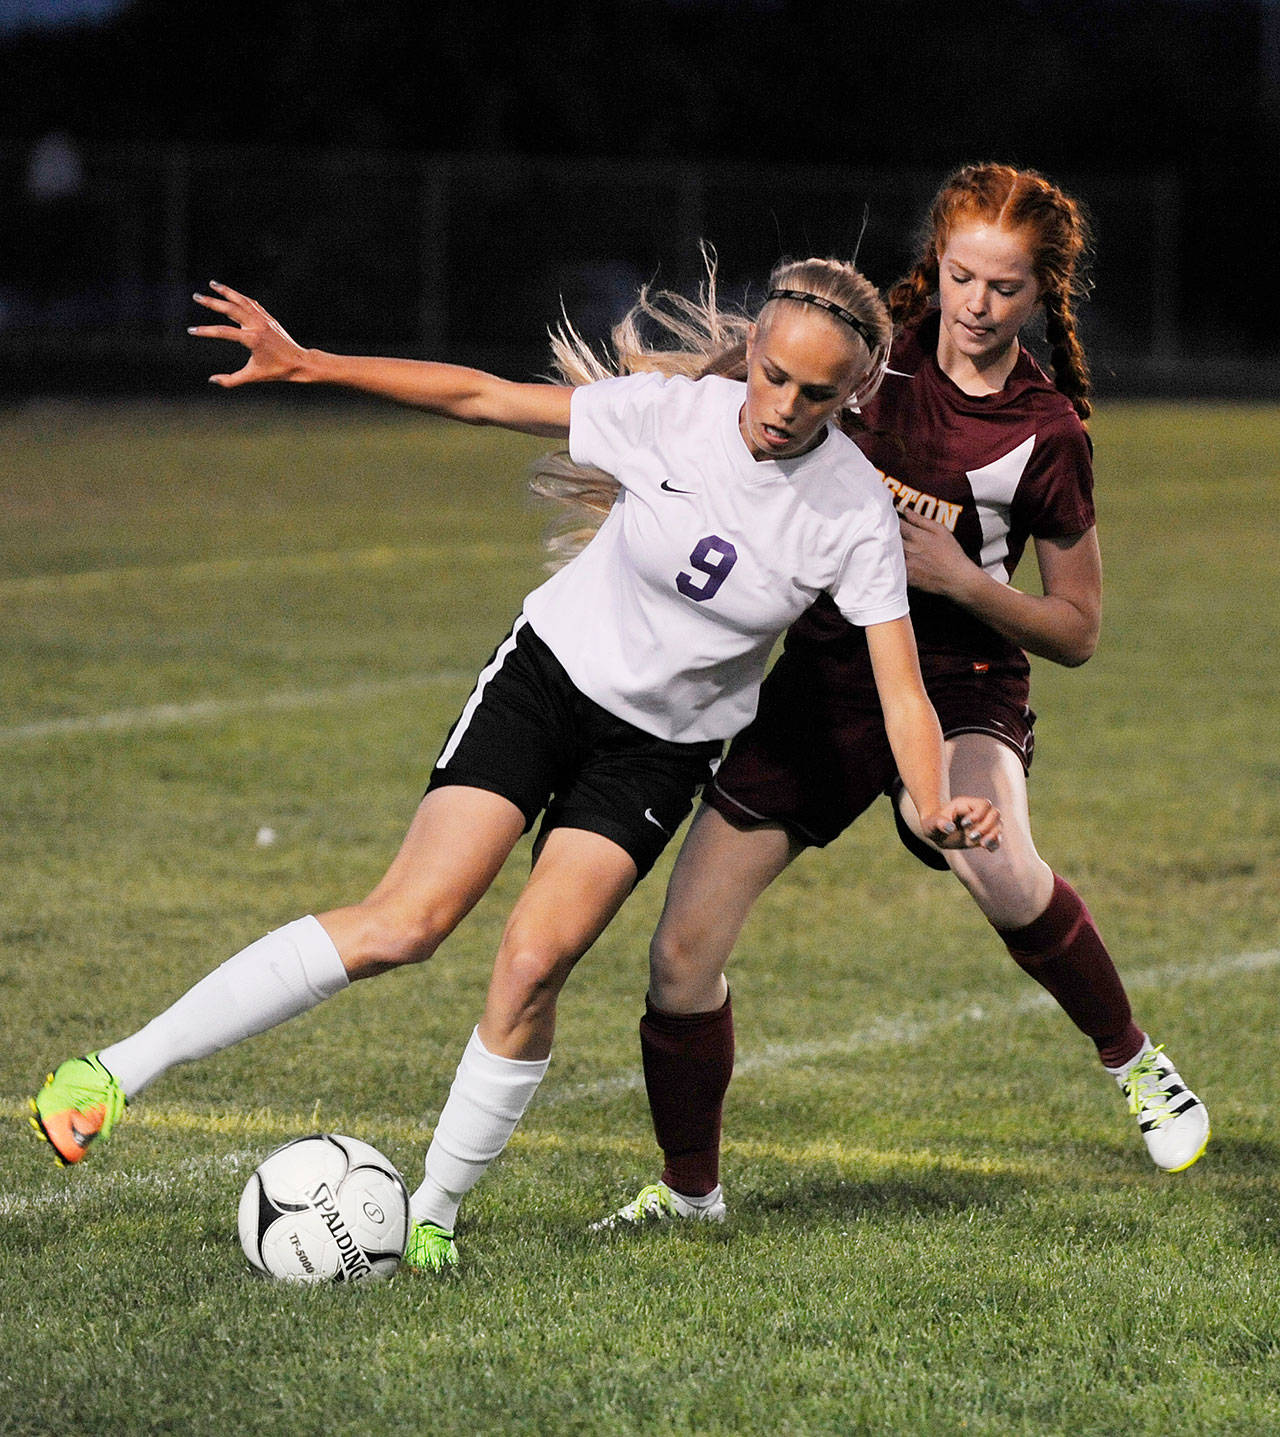 Girls soccer: Wolves rebound from tough loss, beat Buccaneers